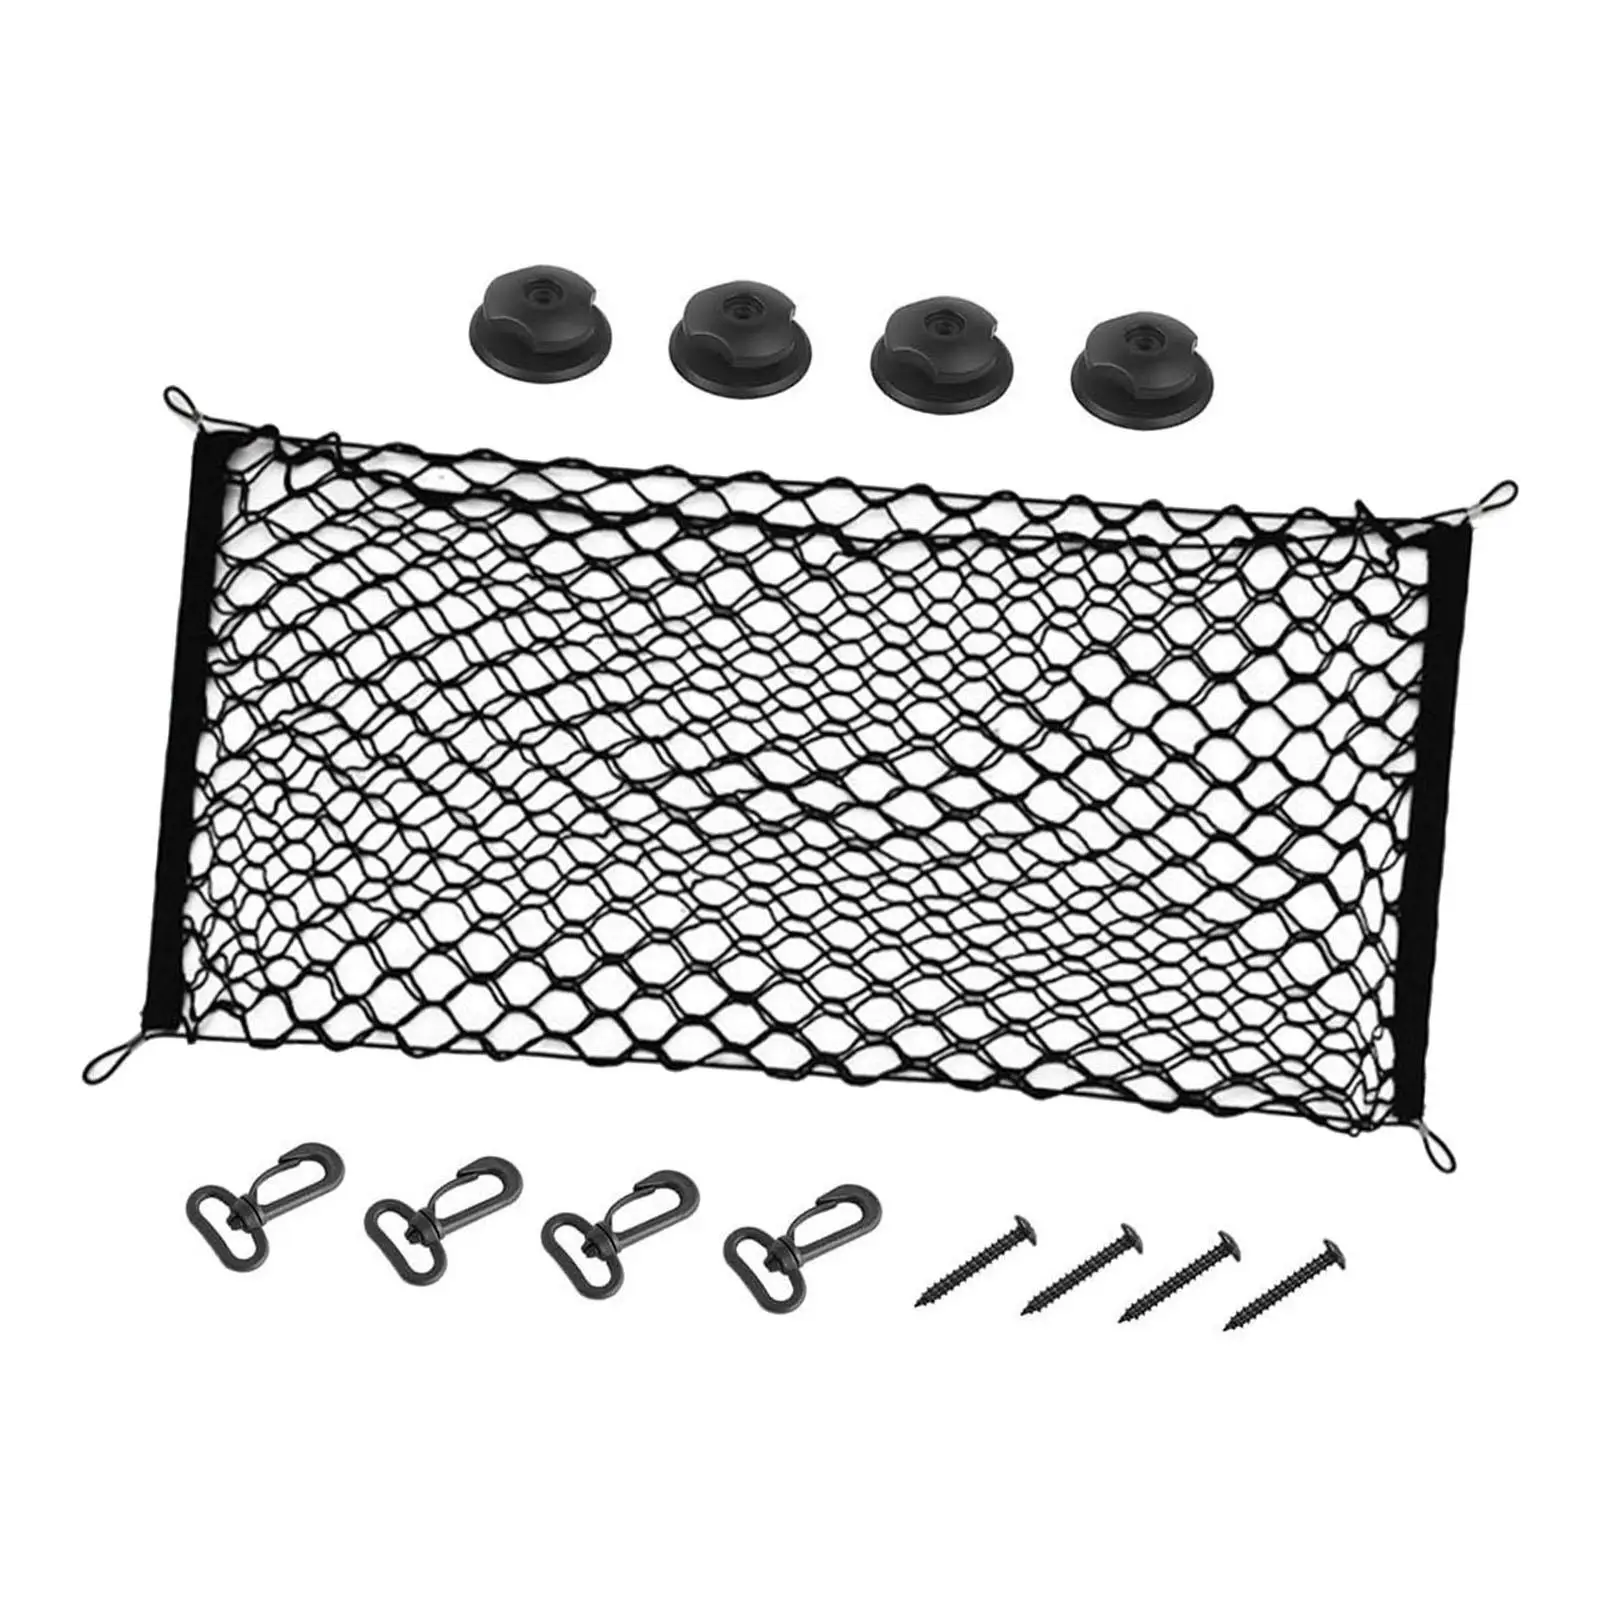 Automotive Cargo Net Black Double Layer Storage Pouch for Trunk RV SUV